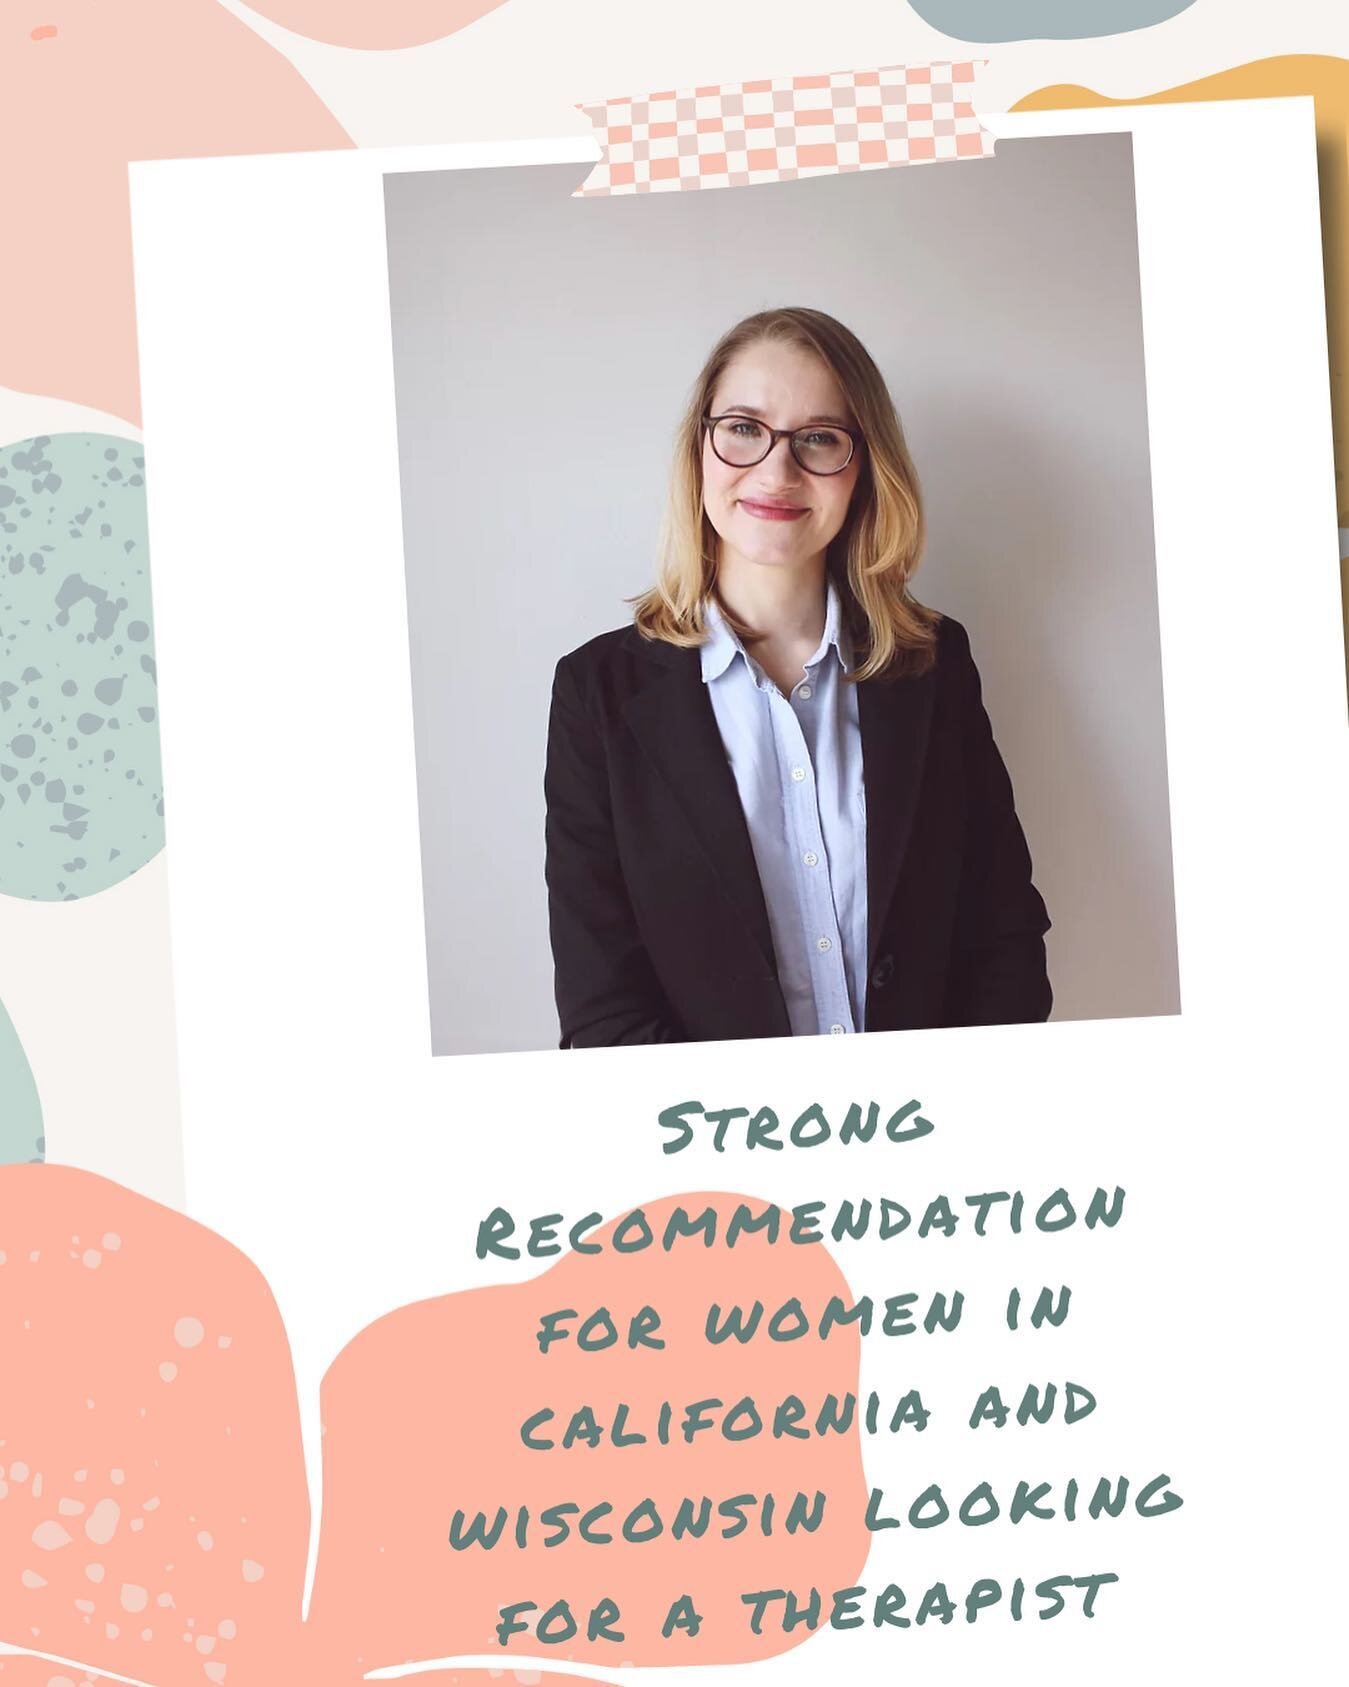 ✔️trauma-informed
✔️genuine &amp; kind
✔️non-judgmental 
✔️highly skilled

What an important time to support women&rsquo;s mental health. Anna Hoffman PhD is a terrific therapist, specializing in just that. She&rsquo;s licensed in both California and